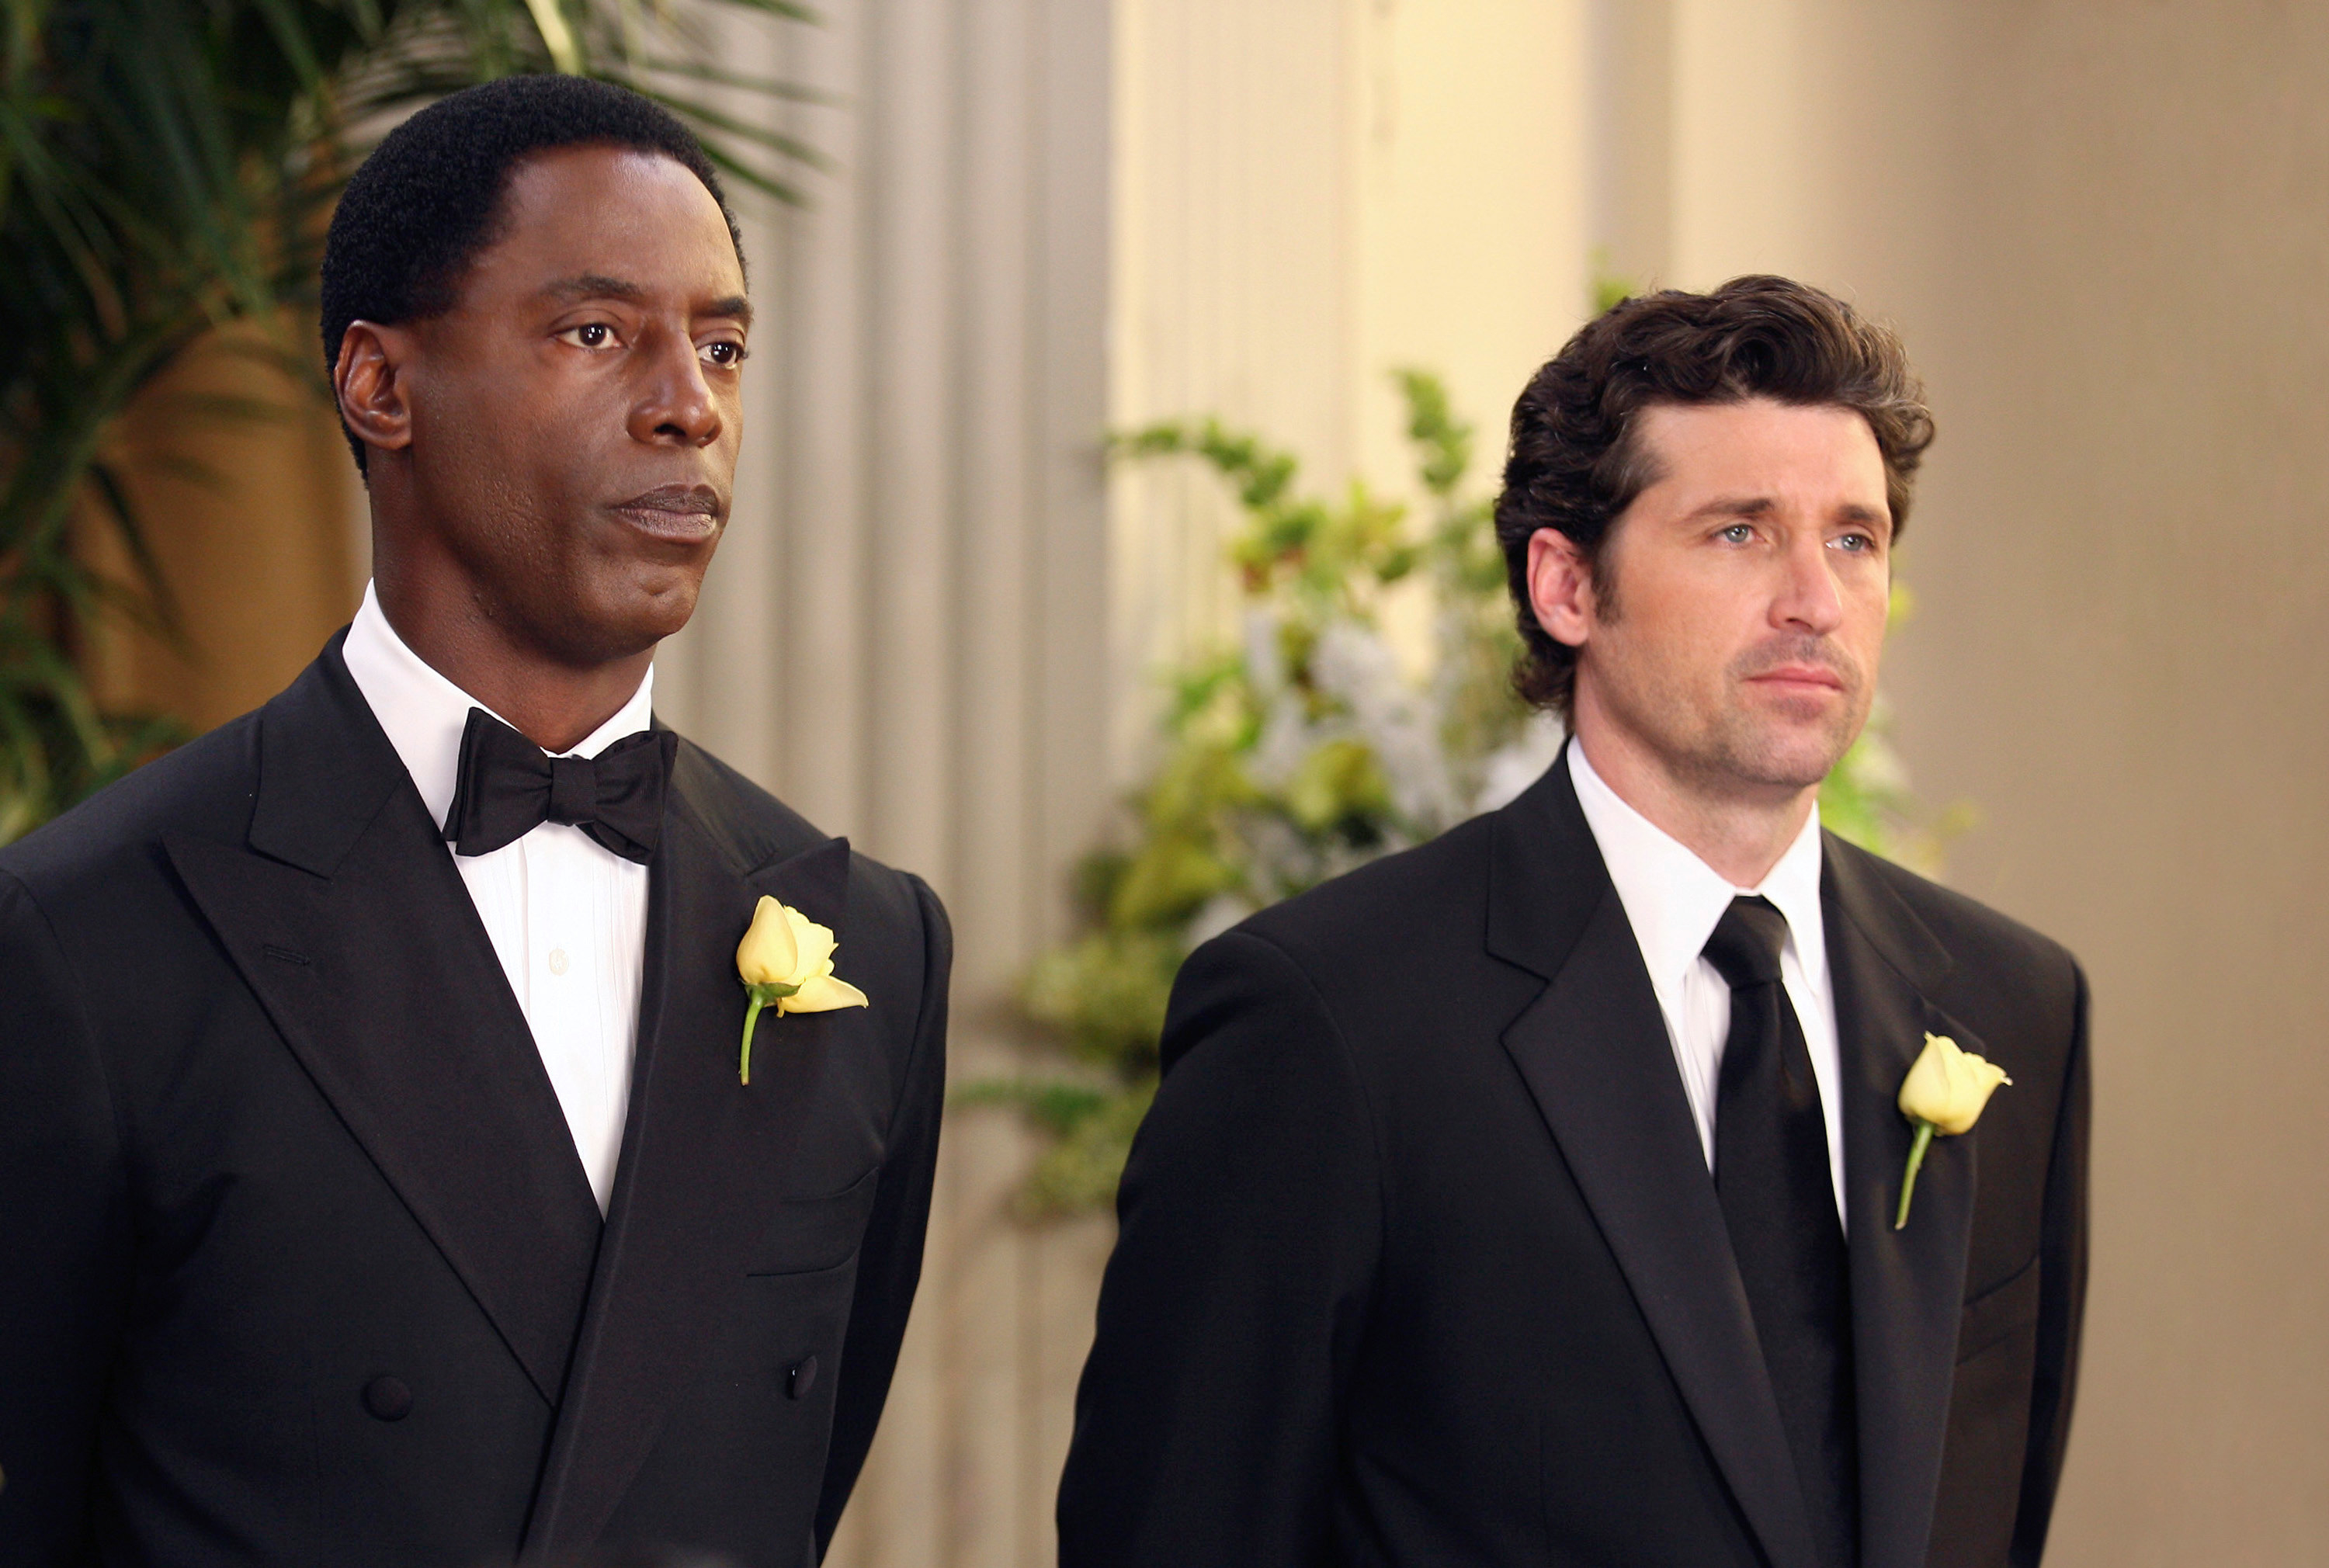 the two characters in suits at a wedding